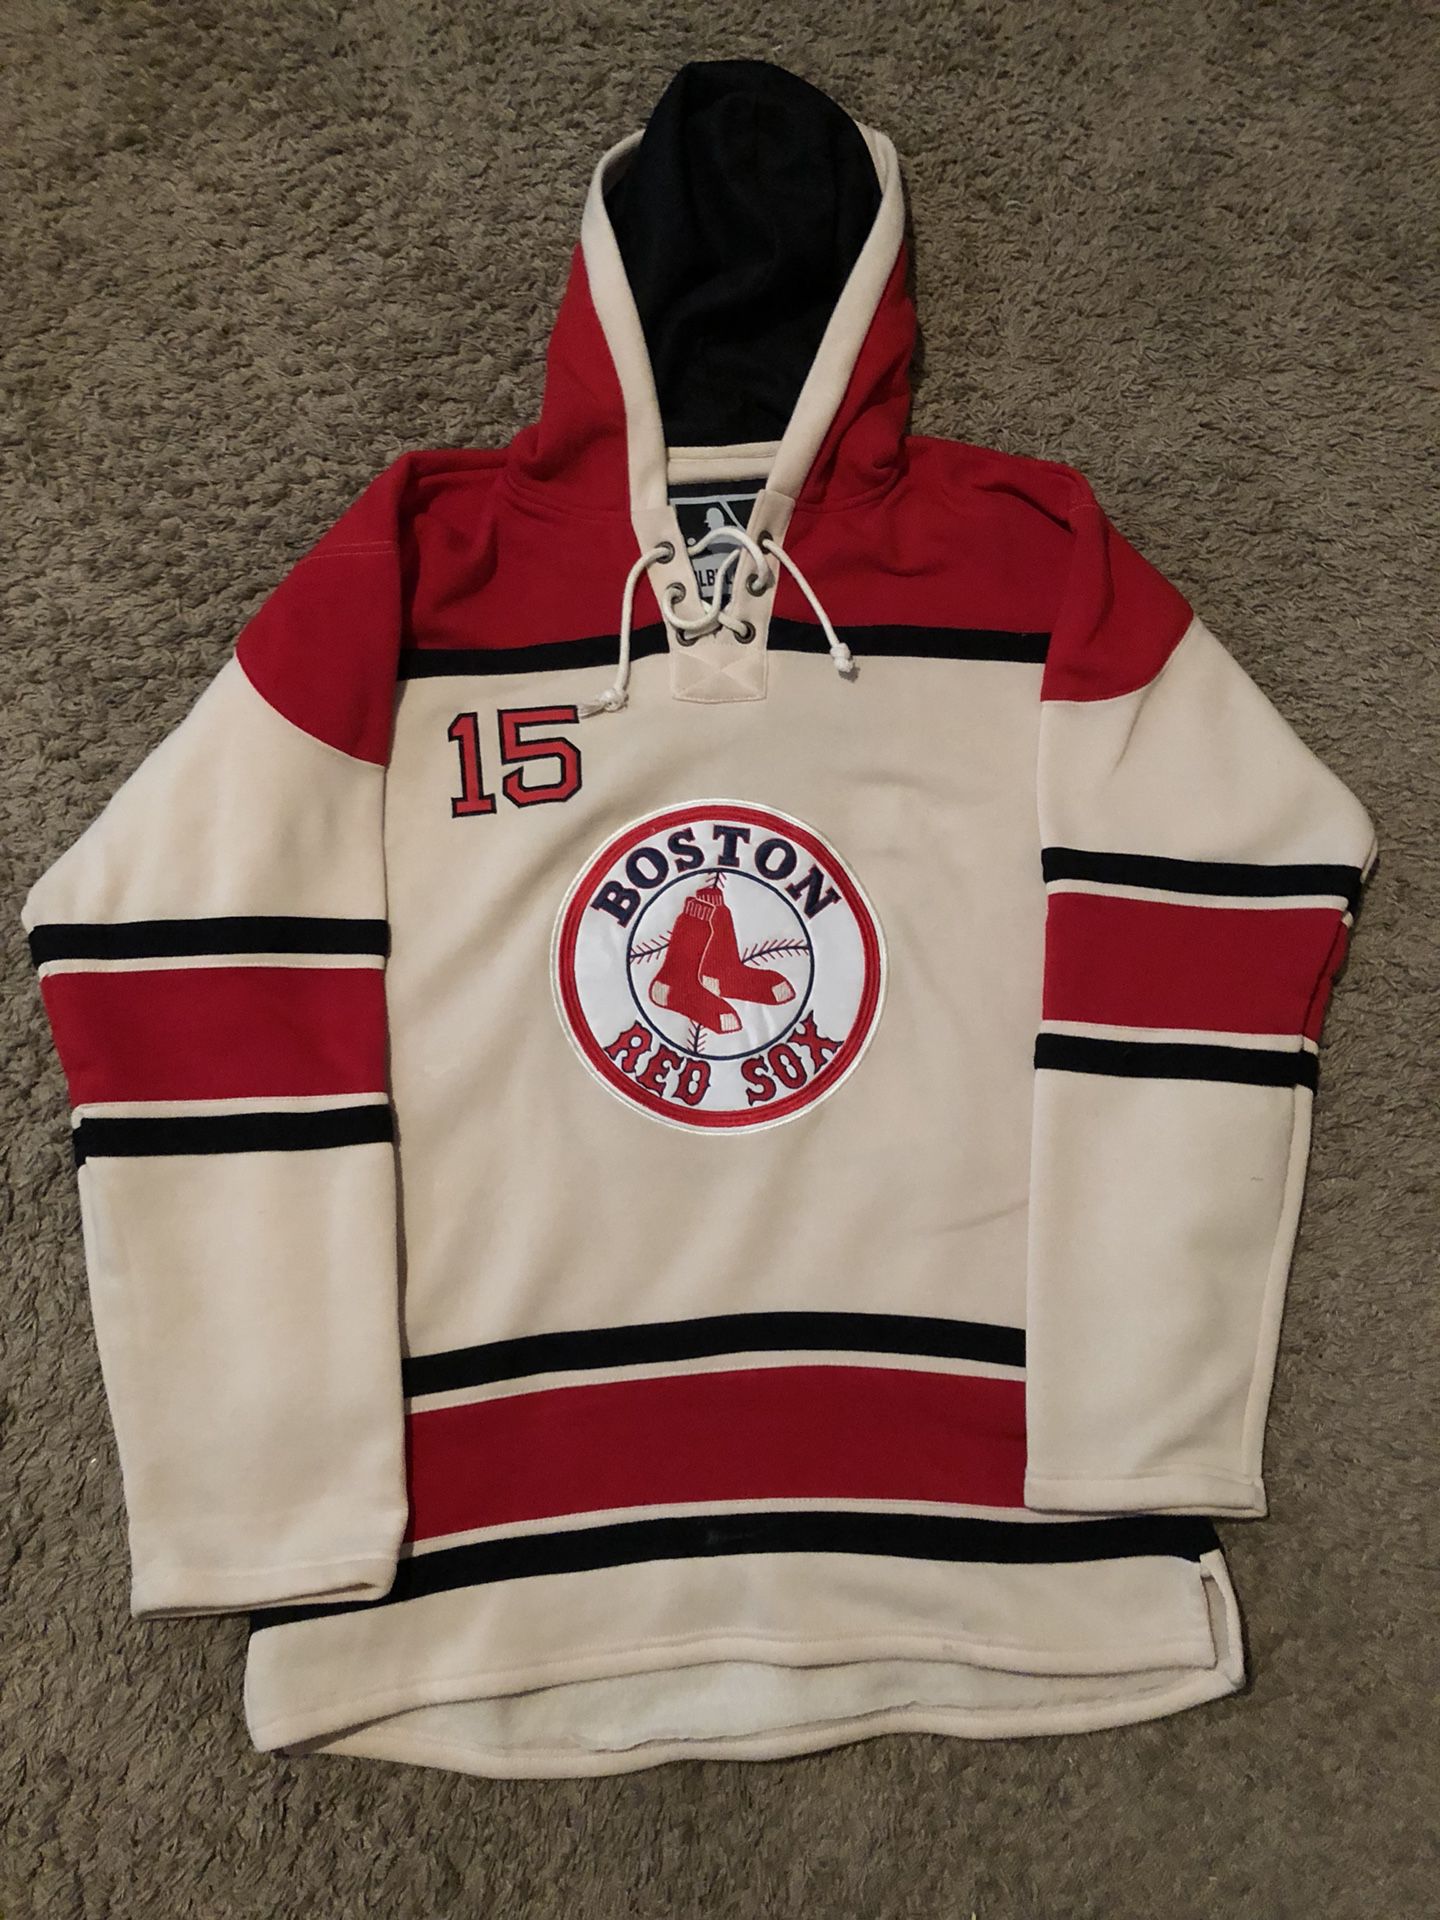 Dustin Pedroia Red Sox hockey jersey for Sale in Gilbert, AZ - OfferUp